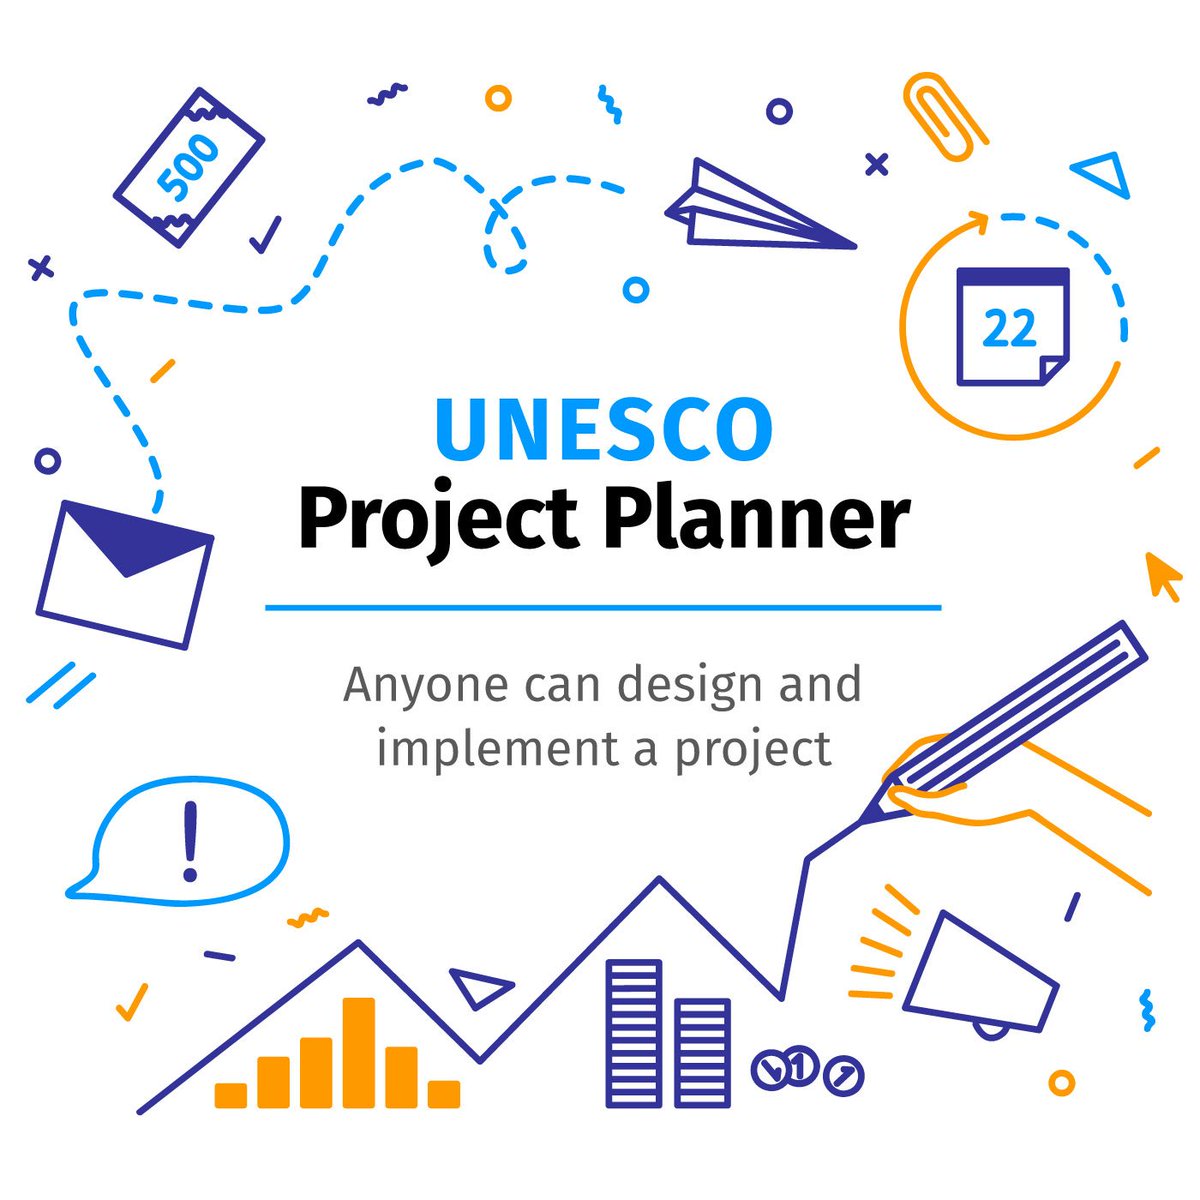 @YouthActionNet UNESCO Project Planner is a good tool for anyone who wishes to design and implement a social project: bit.ly/2Bf1WAI #Passion2Action @ICTinEducation @UNDP_Pakistan @UNVolunteers @JawanPakistan